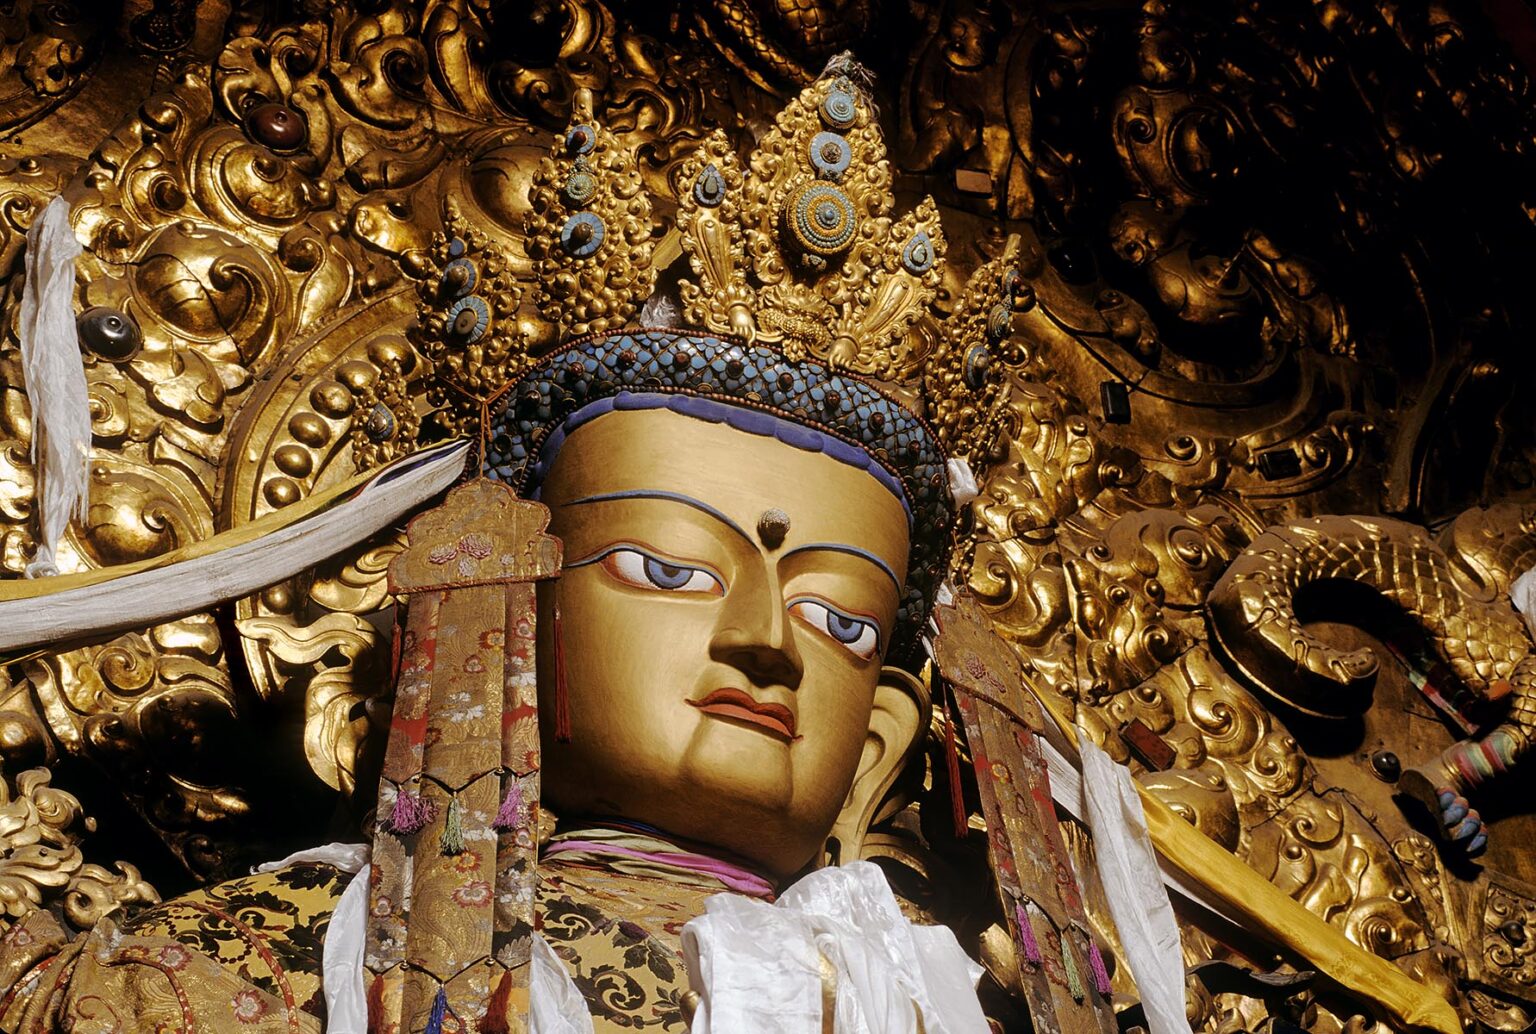 Beautiful JEWEL ENCRUSTED STATUE OF MAITREYA (future Buddha) in the MAIN ASSEMBLY HALL at DREPUNG MONASTERY